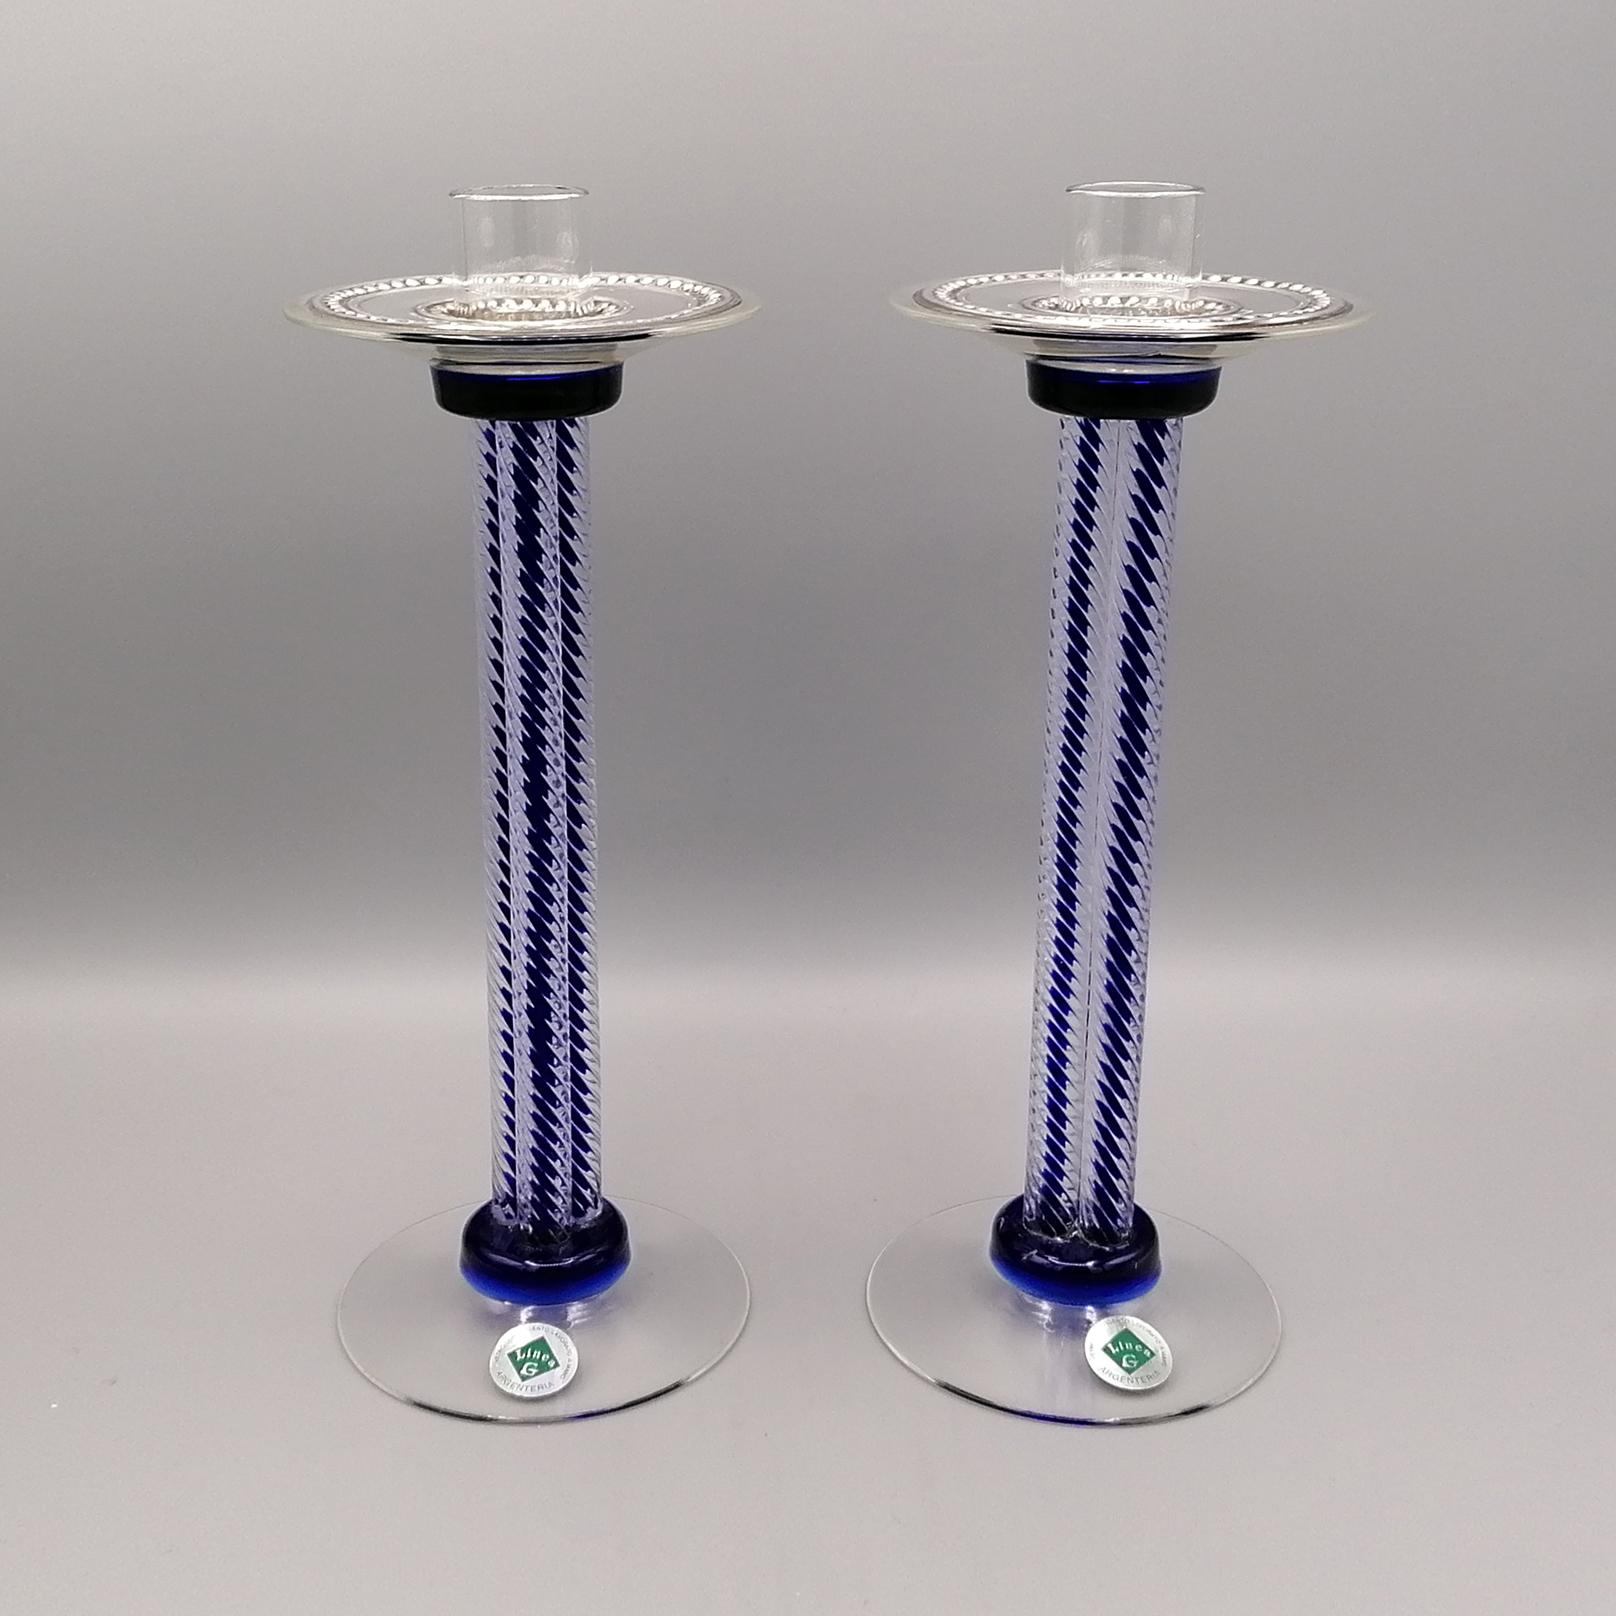 Pair of Murano glass candlesticks, Venice.
The glass is two-tone, transparent and dark blue.
The base is round and smooth with blue shades, while the stem is composed of three tall twisted columns with the dfark blue color inside.
The candle